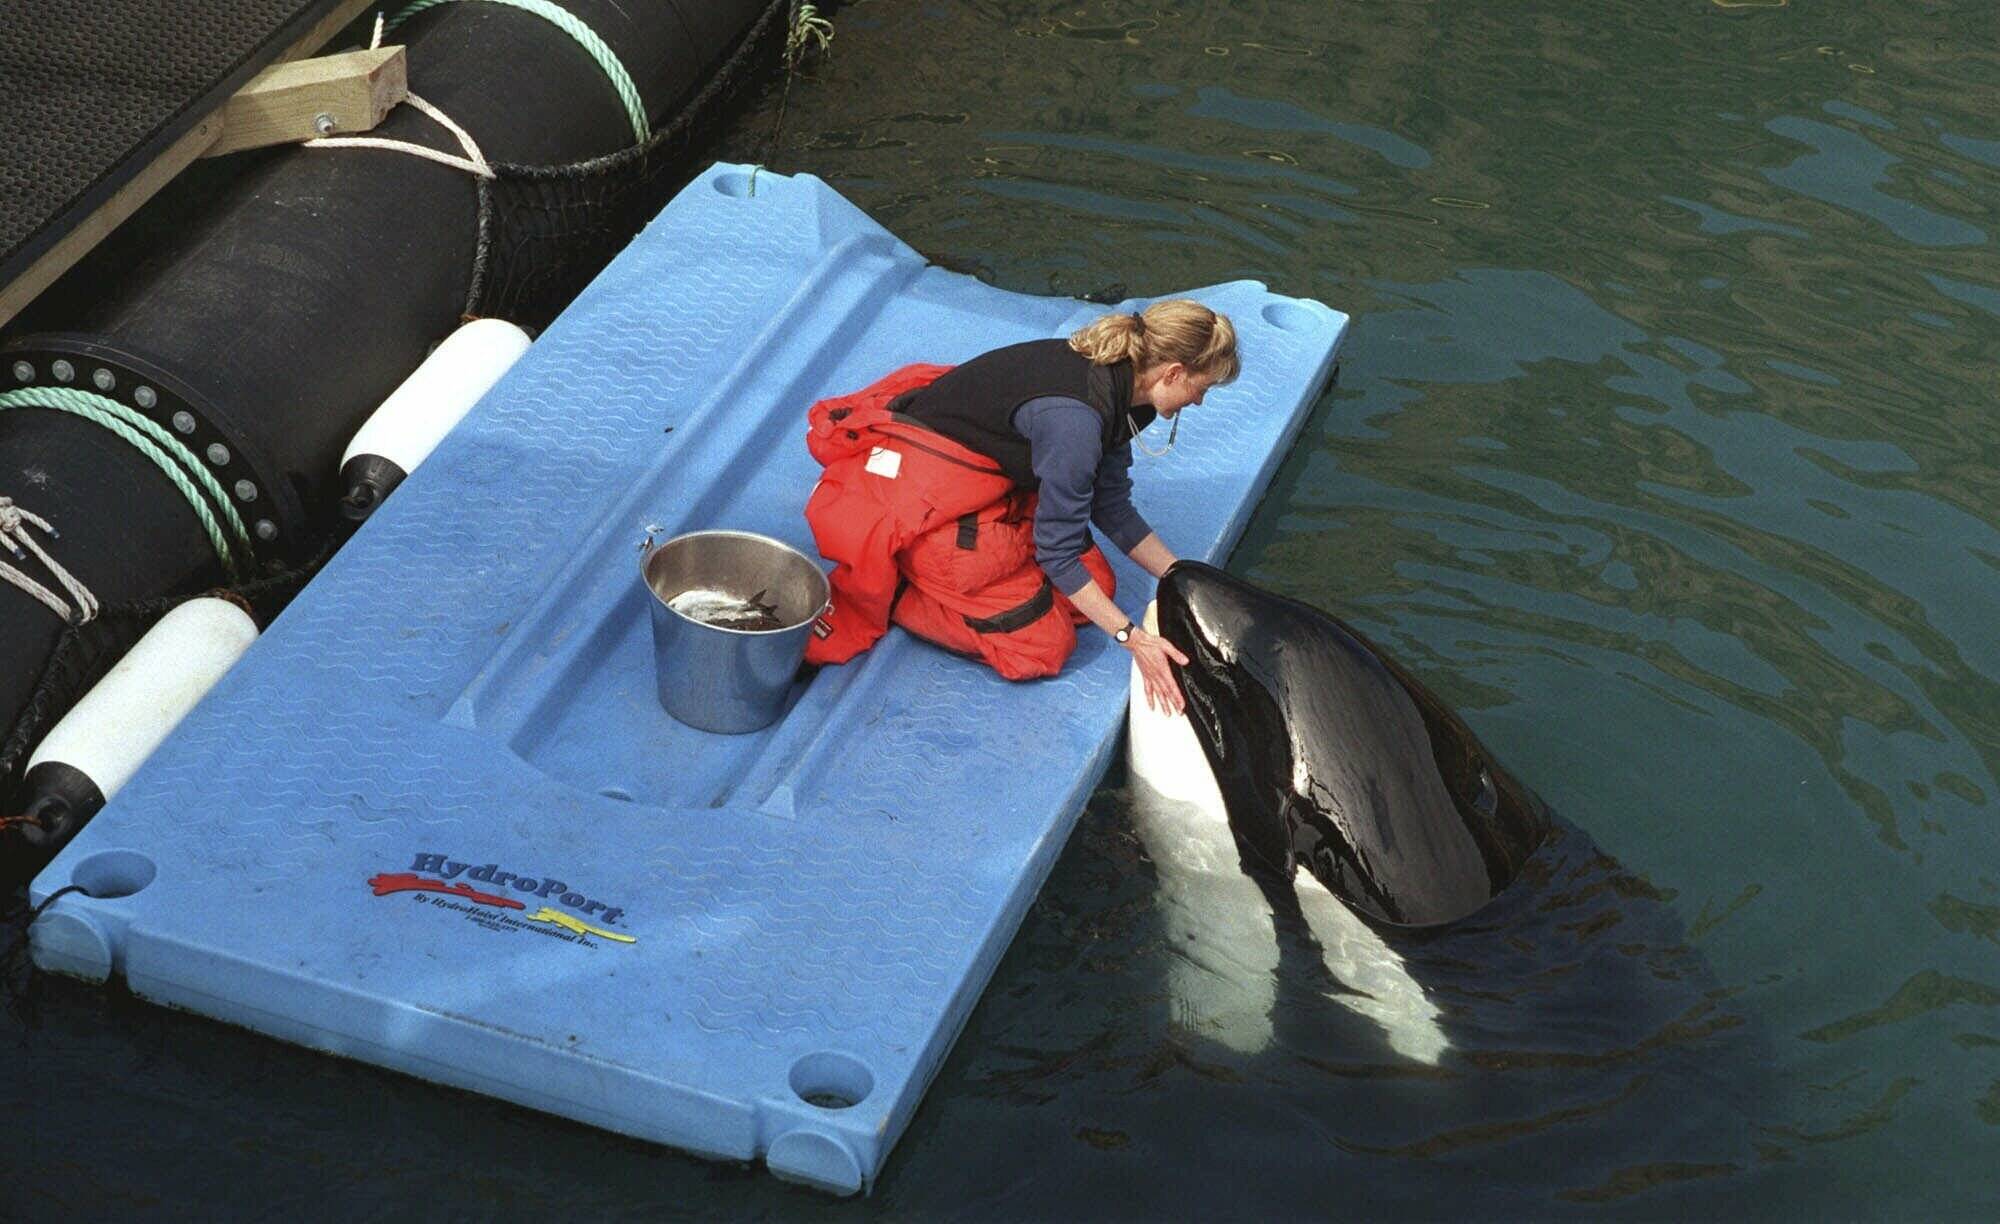 Karen McRea feeds frozen fish to Keiko, star of the movie “Free Willy,” in his pen off the coast of Westman Islands, Iceland, on April 22, 1999. An ambitious plan announced last week to return a killer whale, held captive for more than a half-century, to her home waters in Washington’s Puget Sound thrilled those who have long advocated for her to be freed from her tank at the Miami Seaquarium. But it also called to mind the release of Keiko, who failed to adapt to the wild after being returned to his native Iceland and died five years later. (AP Photo / Kristin Gazlay(